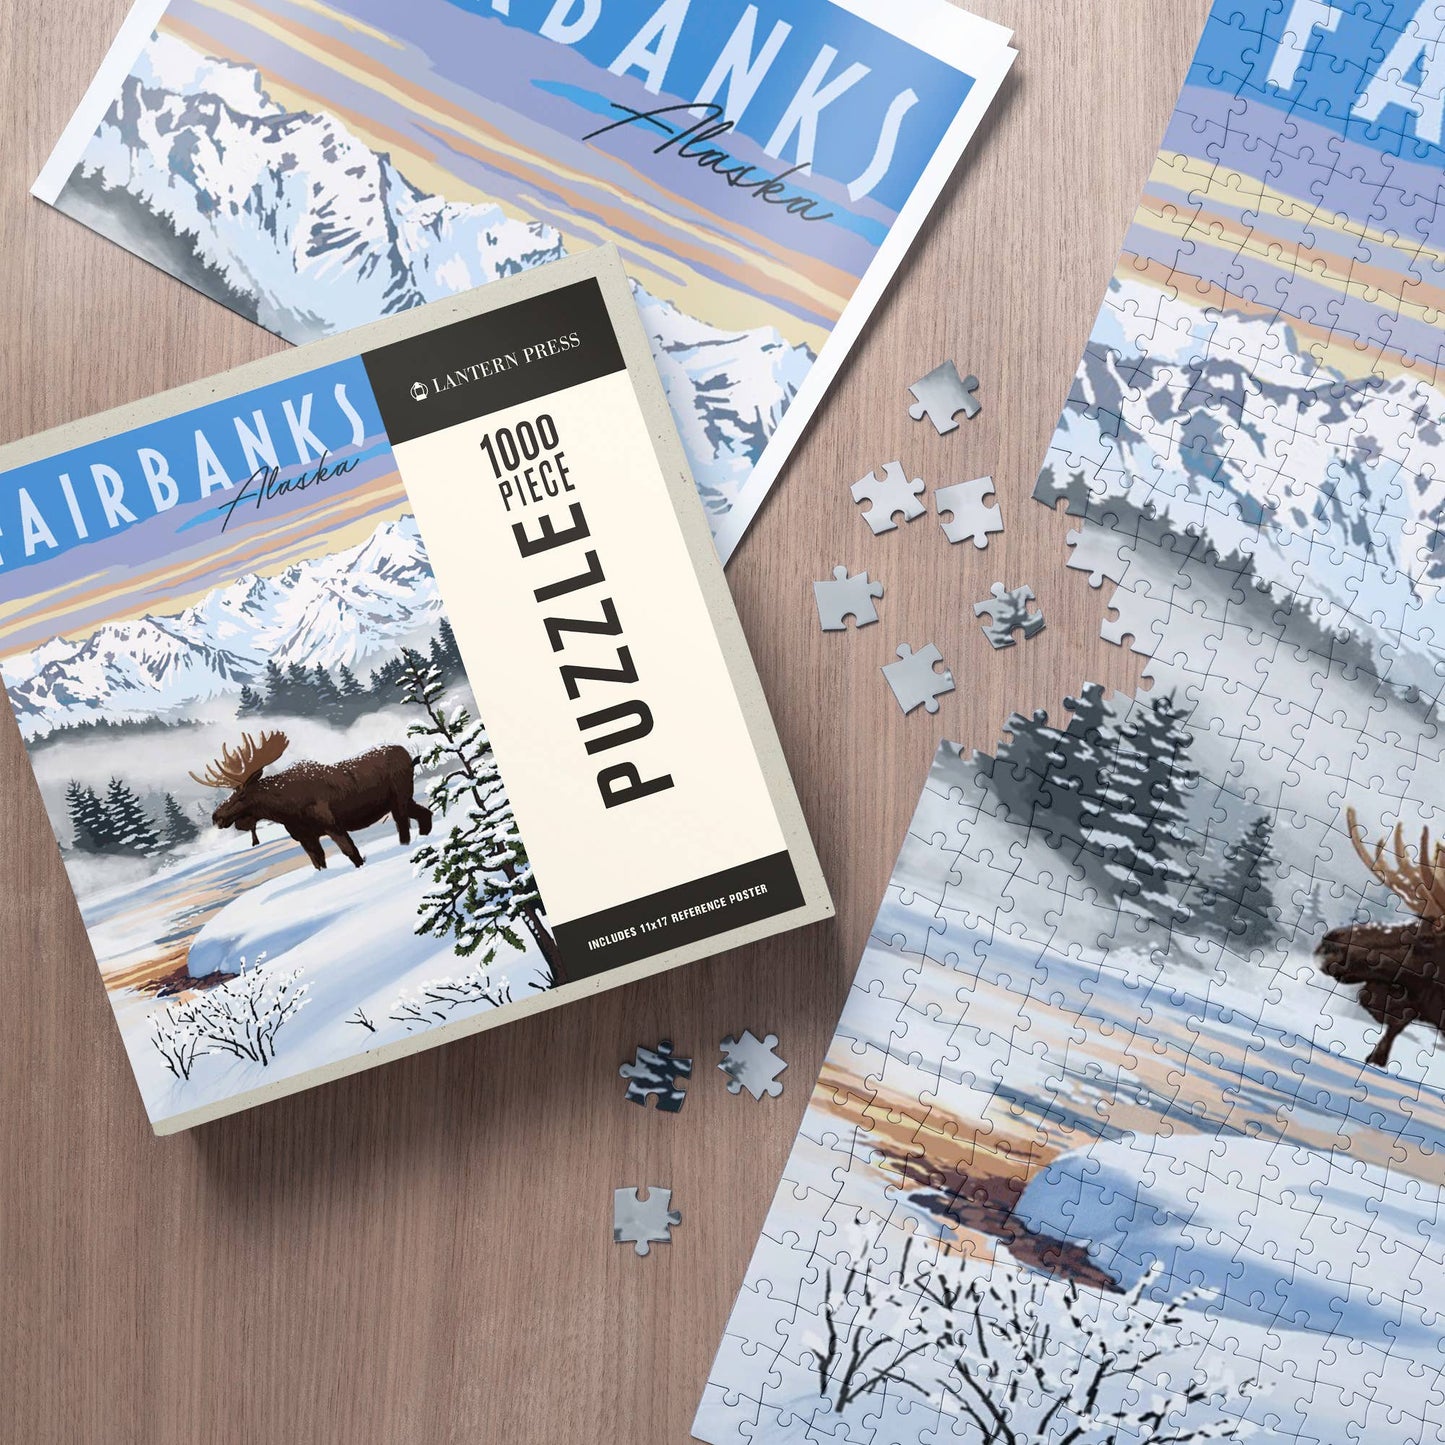 Fairbanks, Alaska with Moose in the Winter 1000 Piece Puzzle